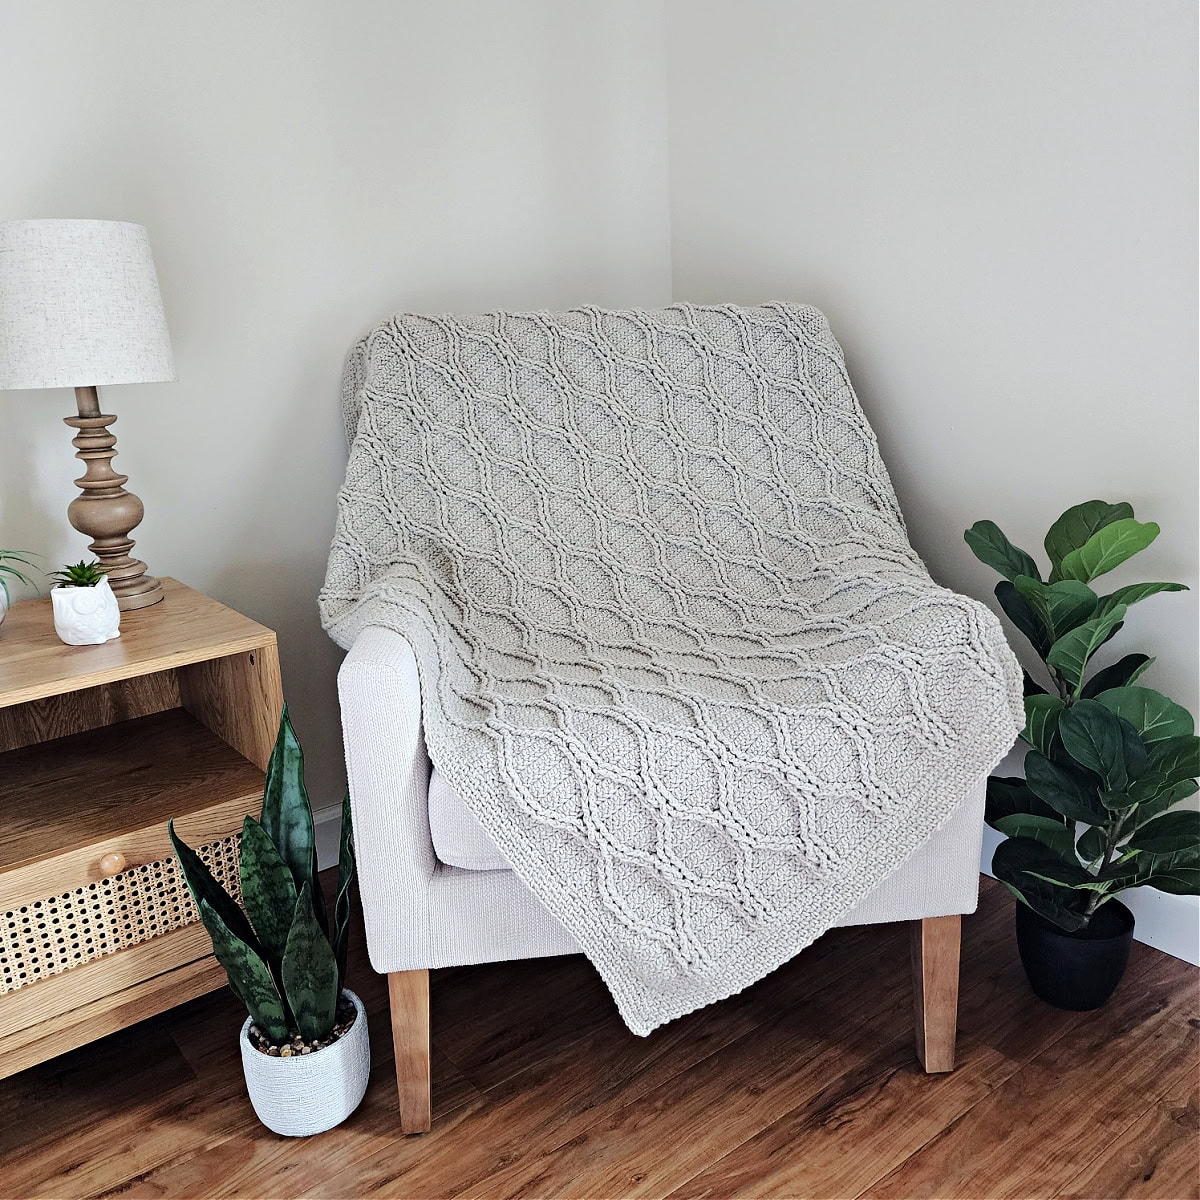 Light taupe crochet cable throw draped across a small armchair with plants next to it.